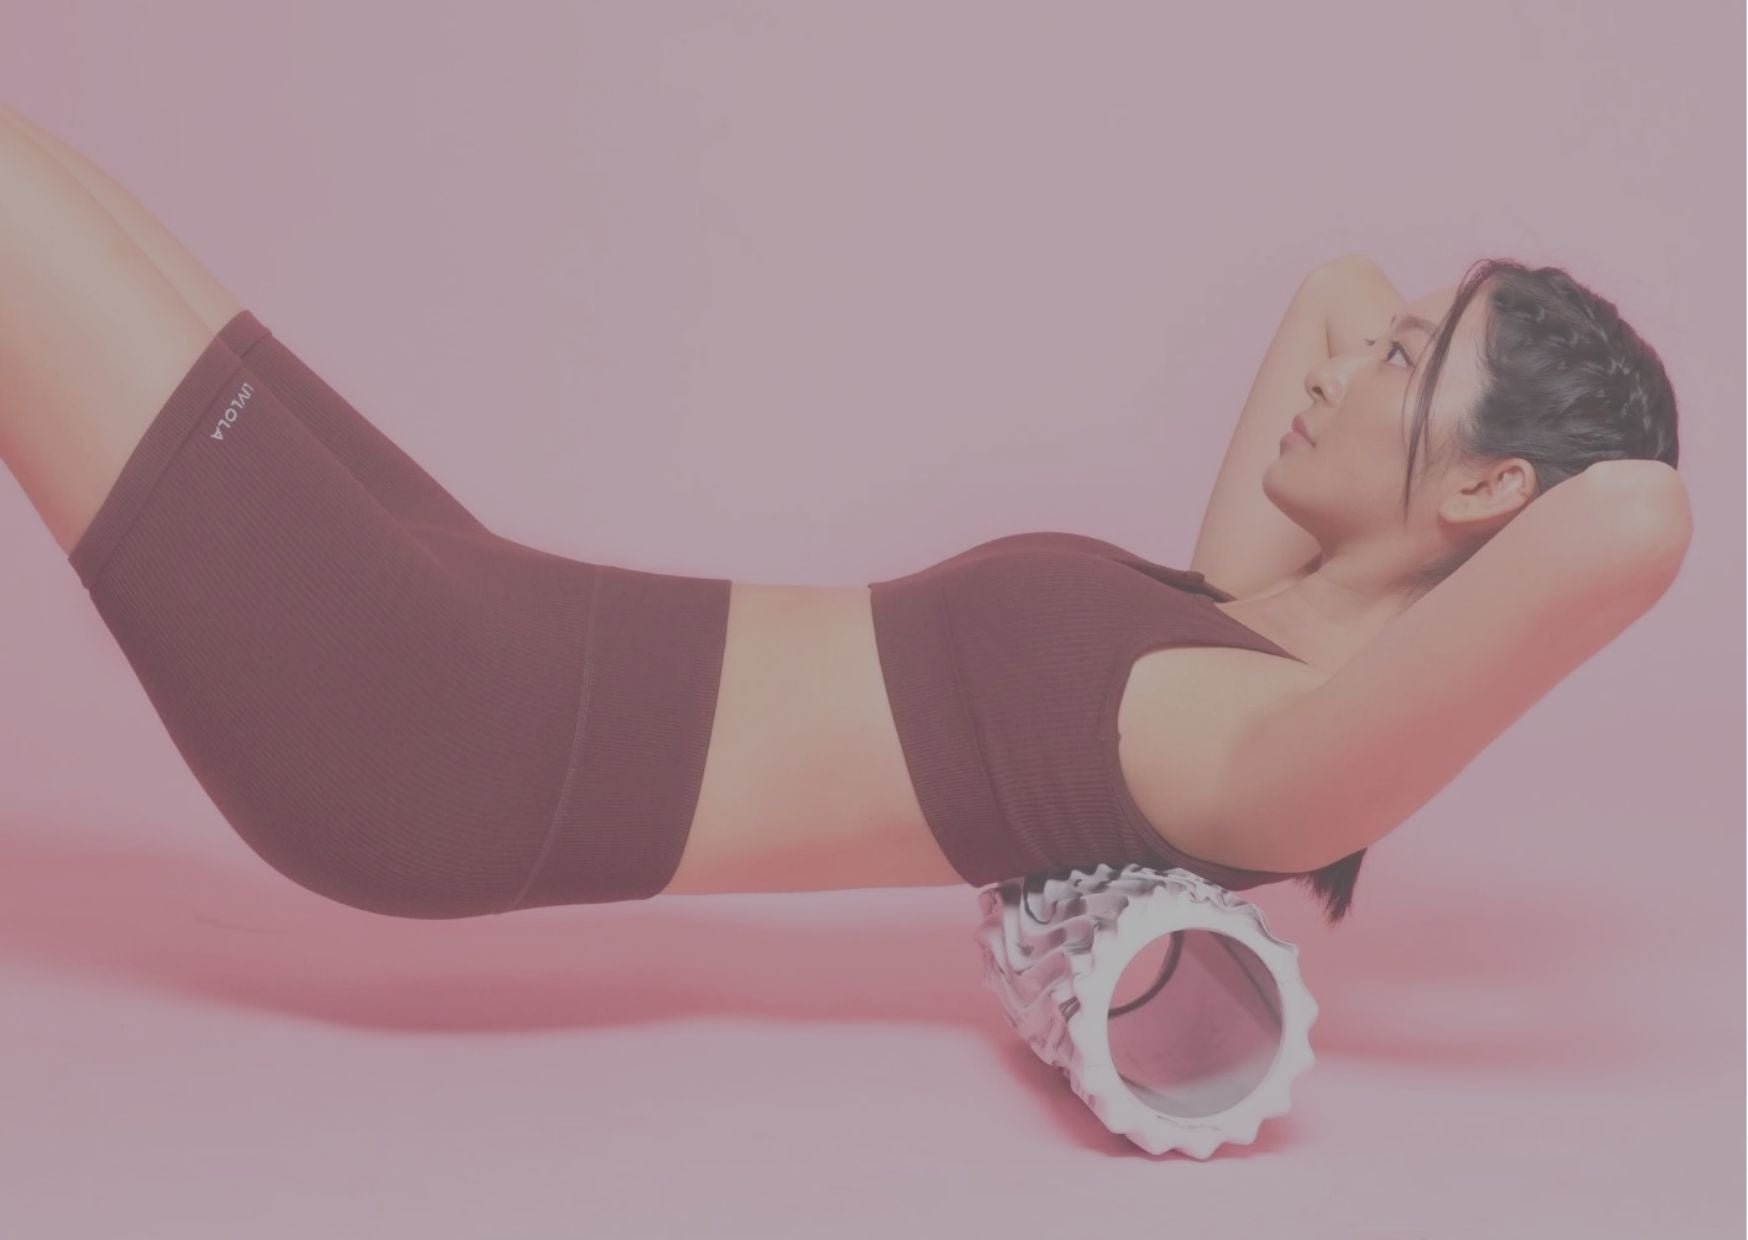 Foam Rolling 101: How To Roll Away Muscle Tightness